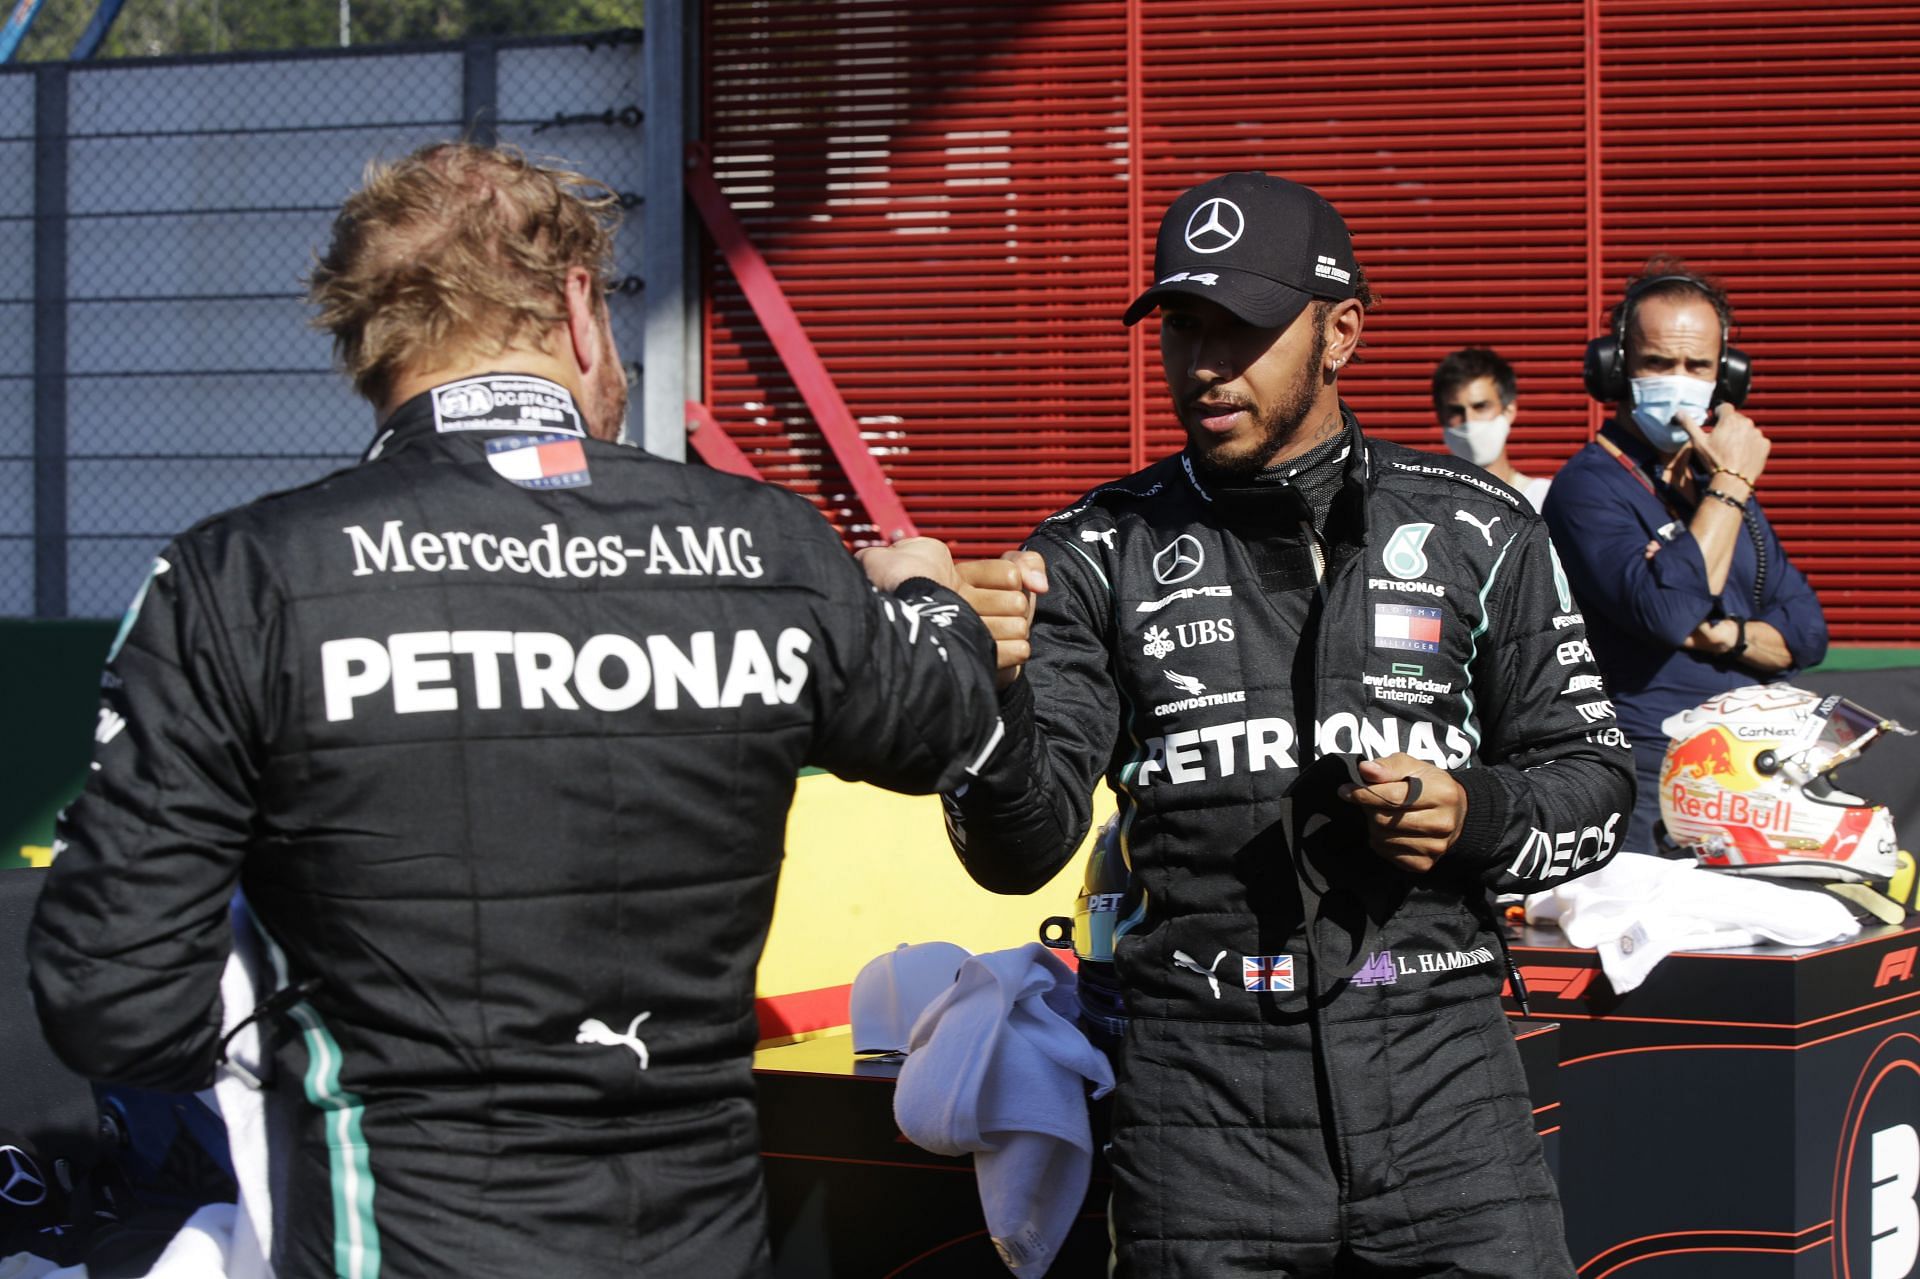 Lewis Hamilton (right) celebrates with Valtteri Bottas (left) during qualifying for the F1 Grand Prix of Tuscany at Mugello Circuit (Photo by Luca Bruno - Pool/Getty Images)